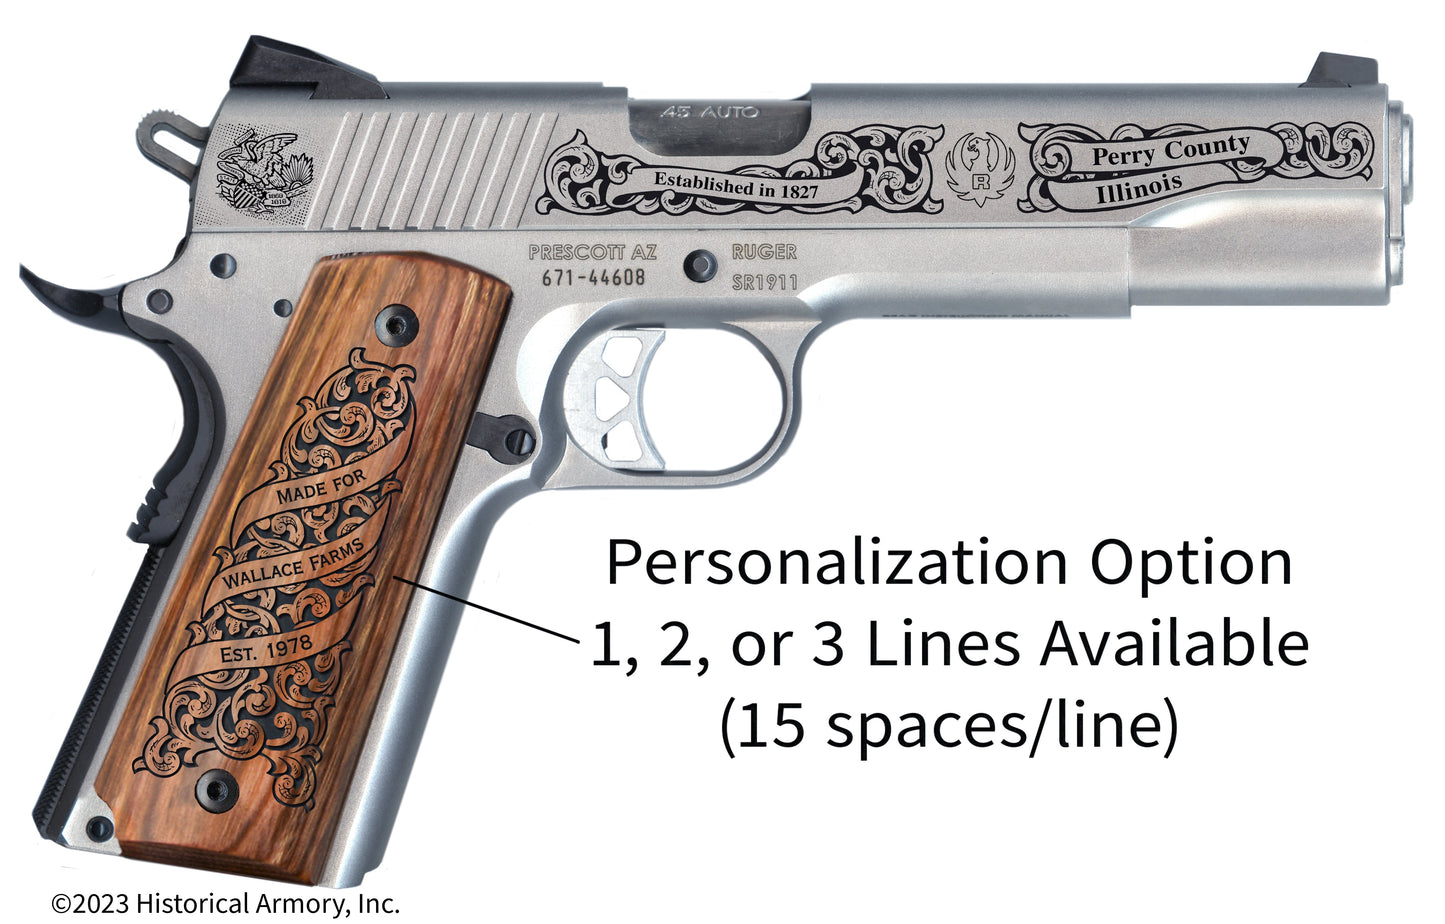 Perry County Illinois Personalized Engraved .45 Auto Ruger 1911